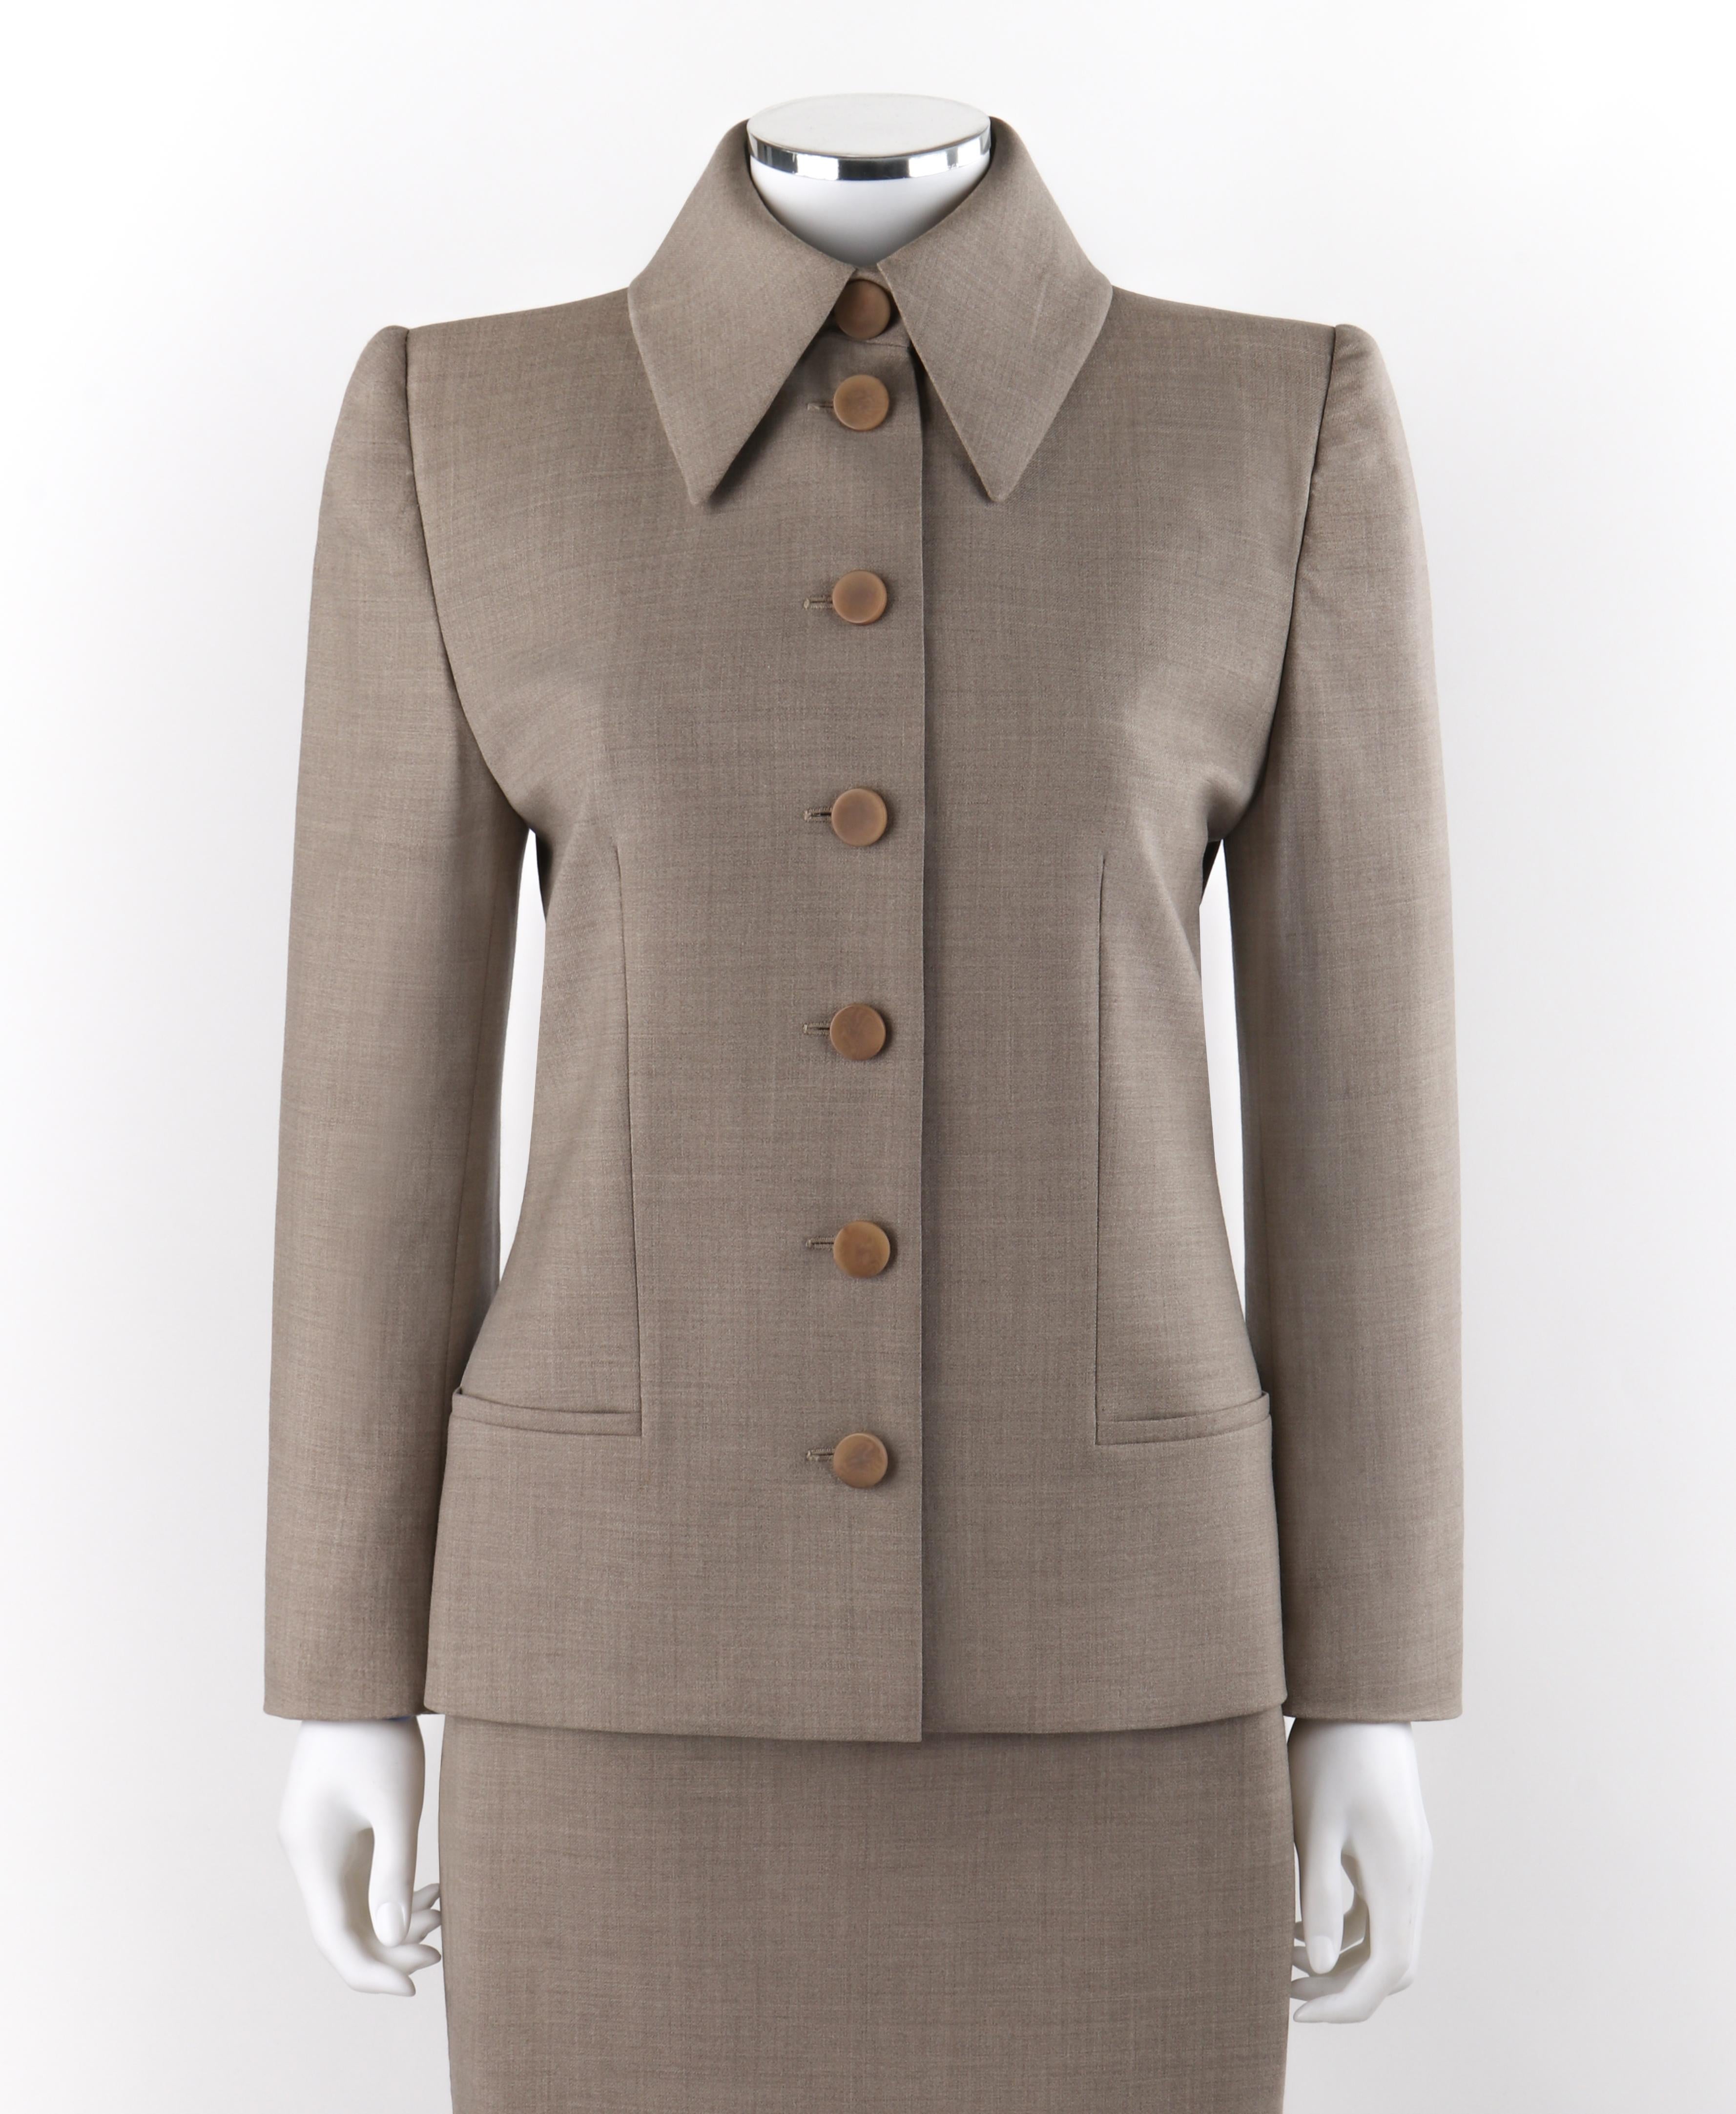 GIVENCHY Couture A/W 1998 ALEXANDER McQUEEN Beige Blazer Jacket Skirt Suit Set

Brand / Manufacturer: Givenchy Couture
Collection: A/W 1998
Designer: Alexander McQueen
Style: Blazer jacket; fitted sheath skirt
Color(s): Beige
Lined: Yes
Marked